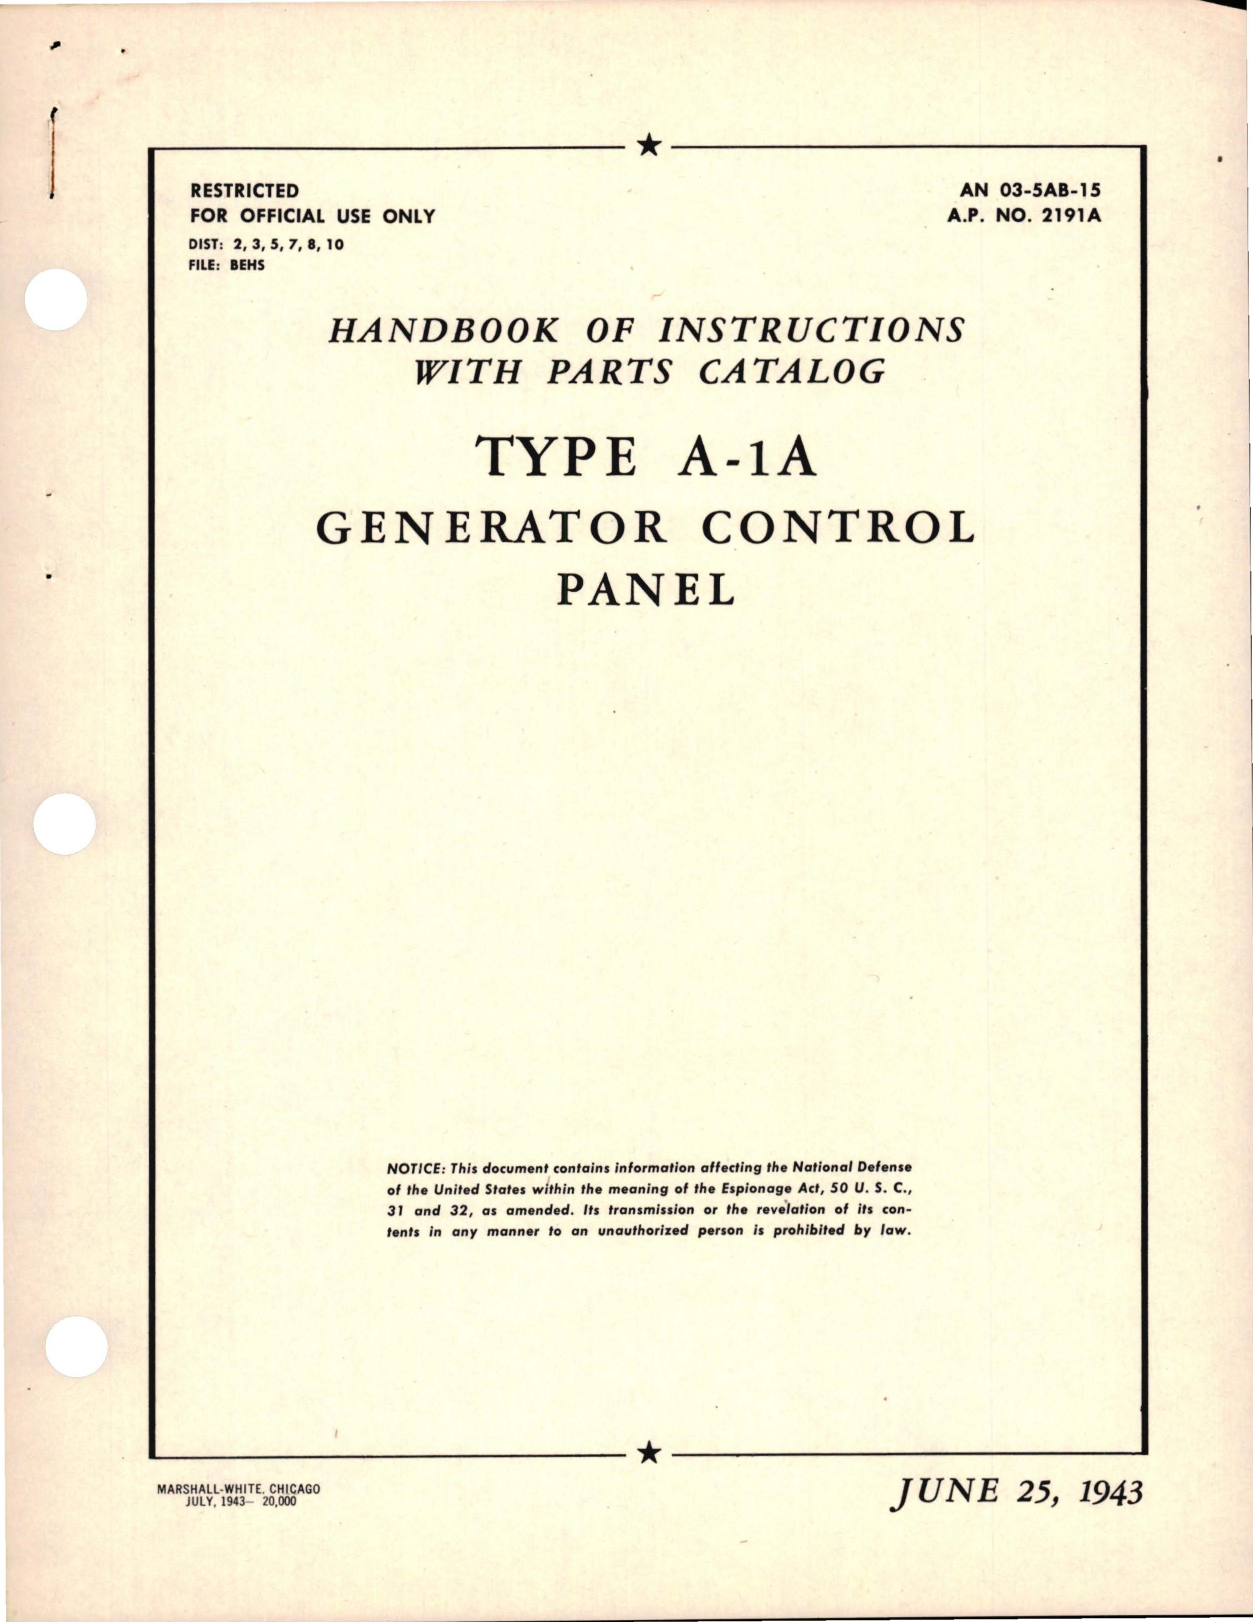 Sample page 1 from AirCorps Library document: Instructions with Parts Catalog for Generator Control Panel - Type A-1A